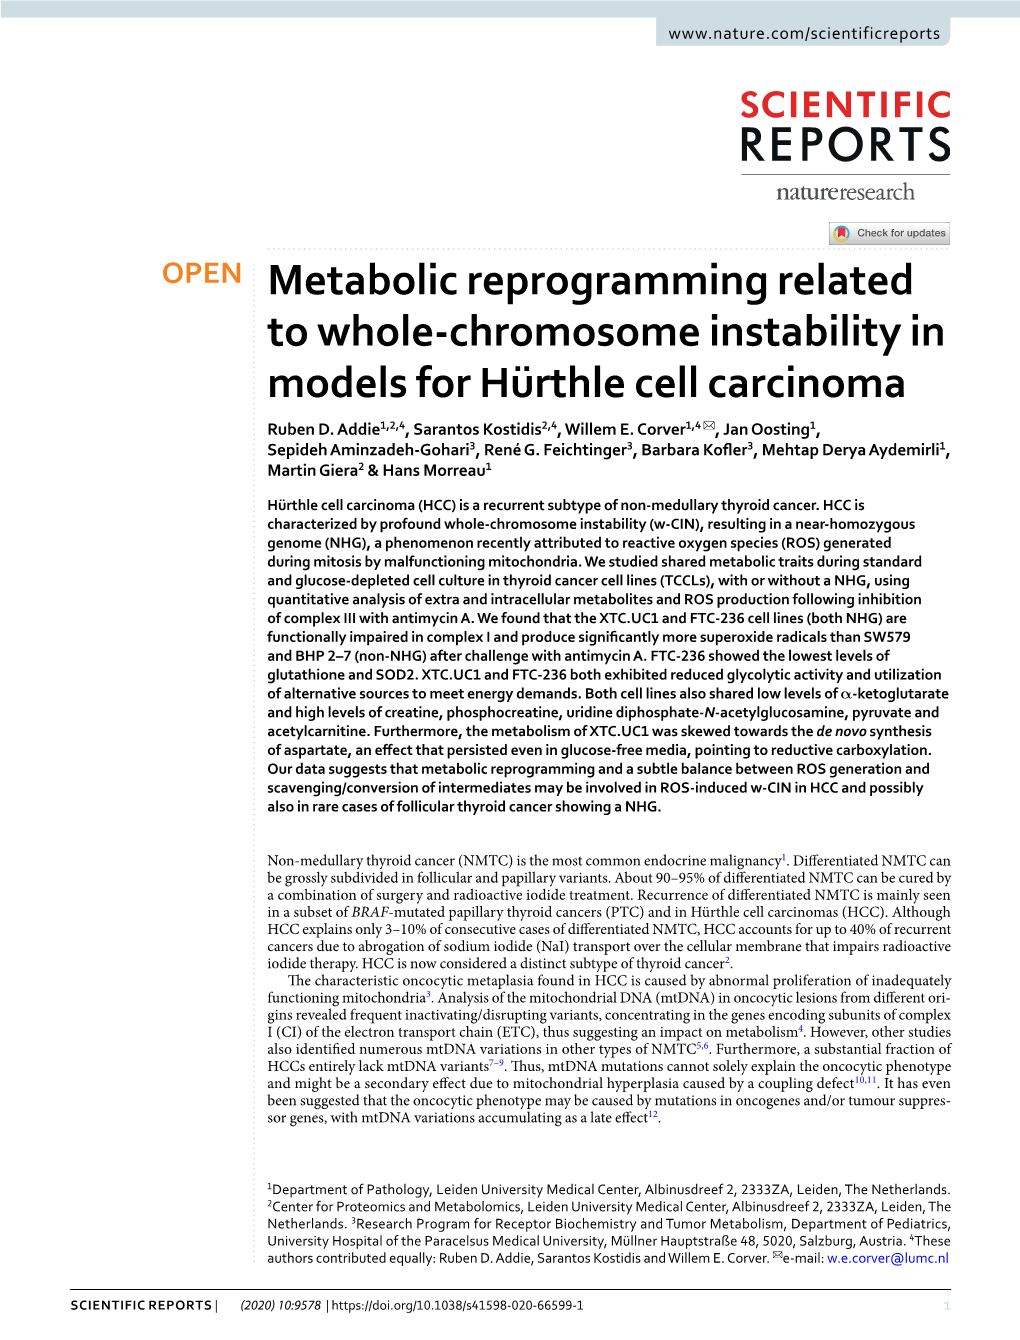 Metabolic Reprogramming Related to Whole-Chromosome Instability in Models for Hürthle Cell Carcinoma Ruben D